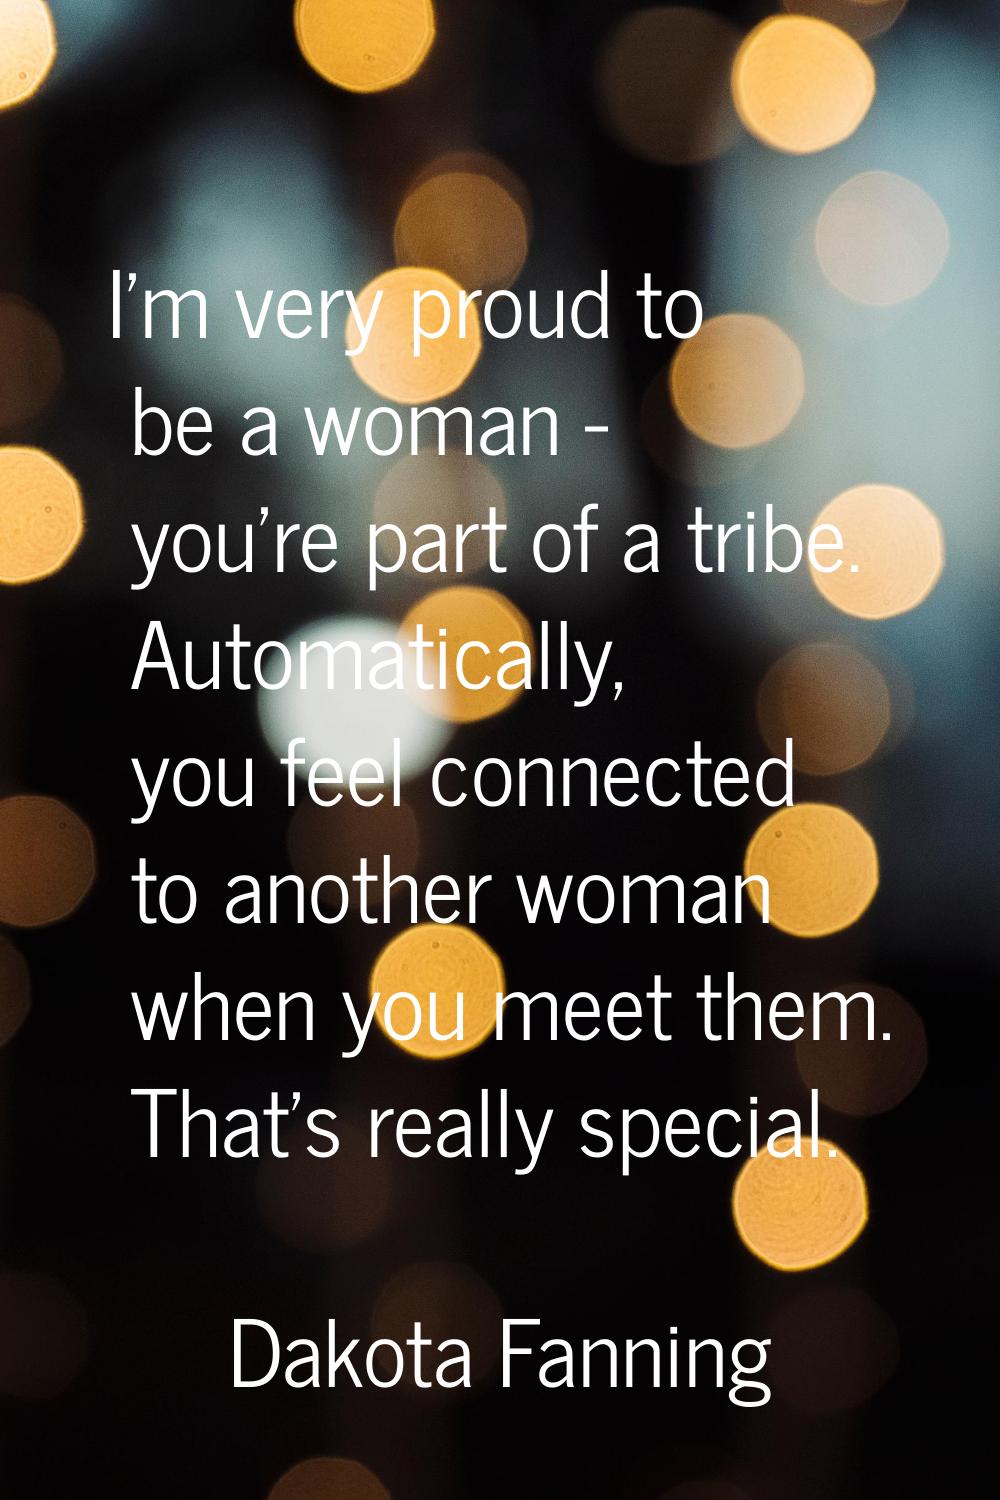 I'm very proud to be a woman - you're part of a tribe. Automatically, you feel connected to another